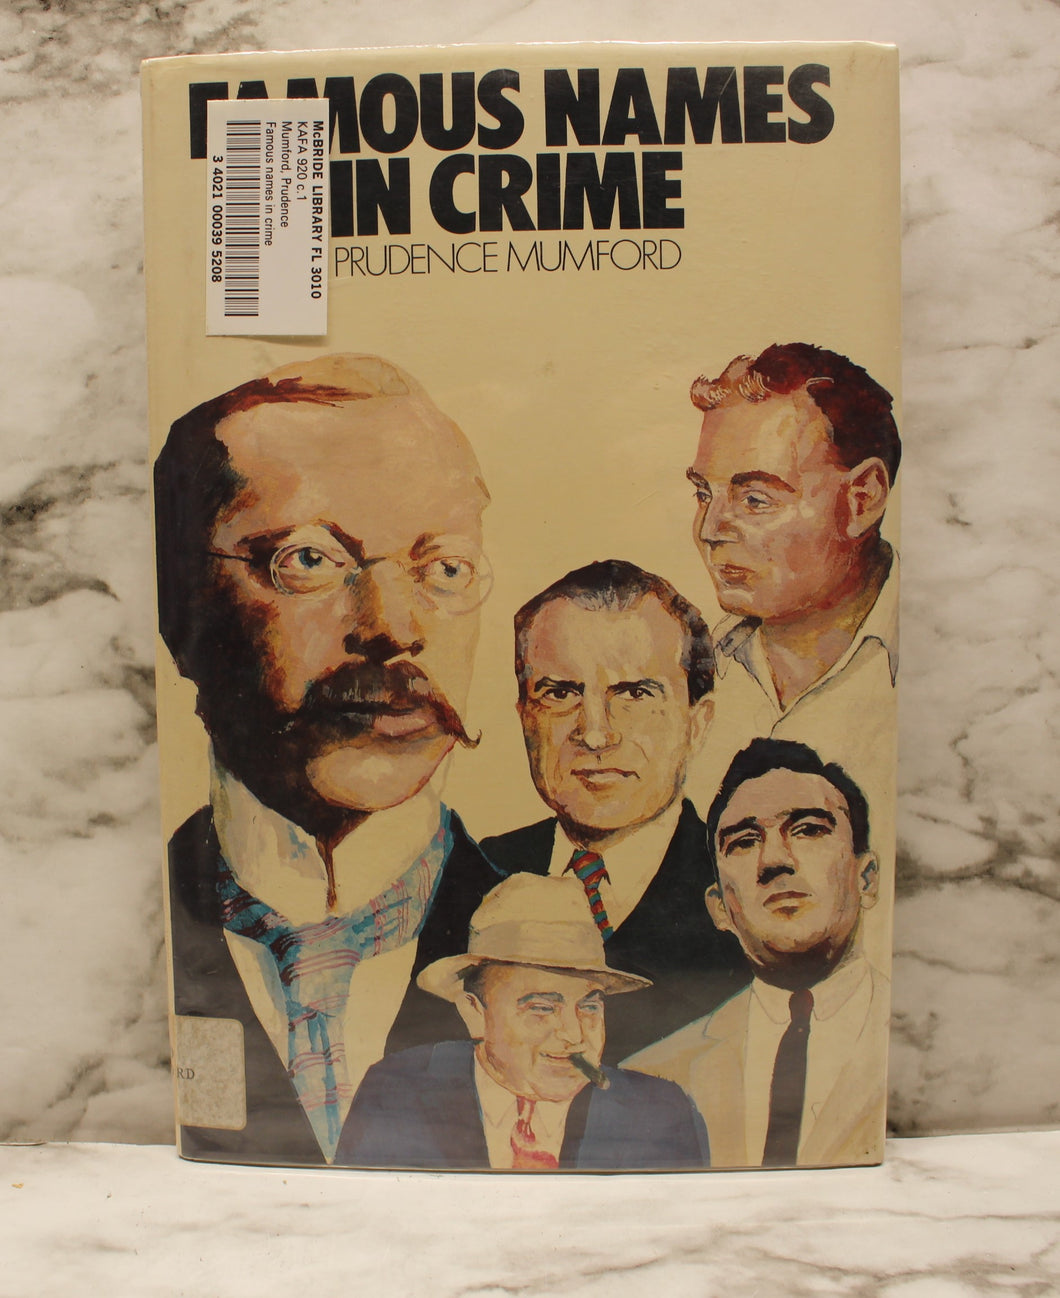 Famous Names In Crime by Prudence Mumford - Used